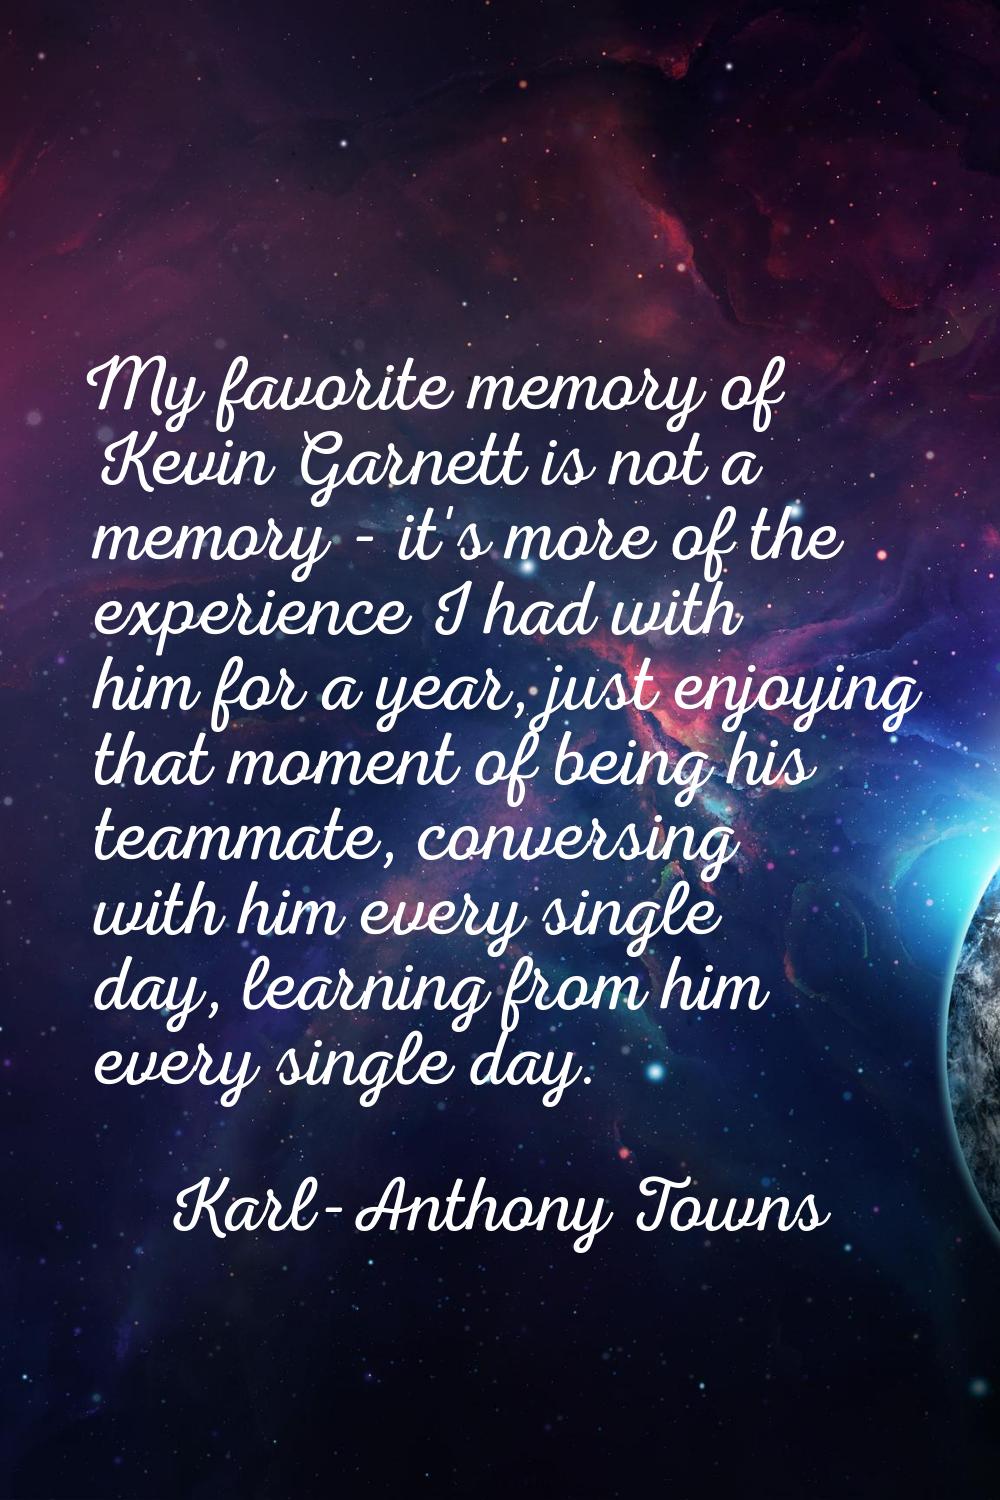 My favorite memory of Kevin Garnett is not a memory - it's more of the experience I had with him fo